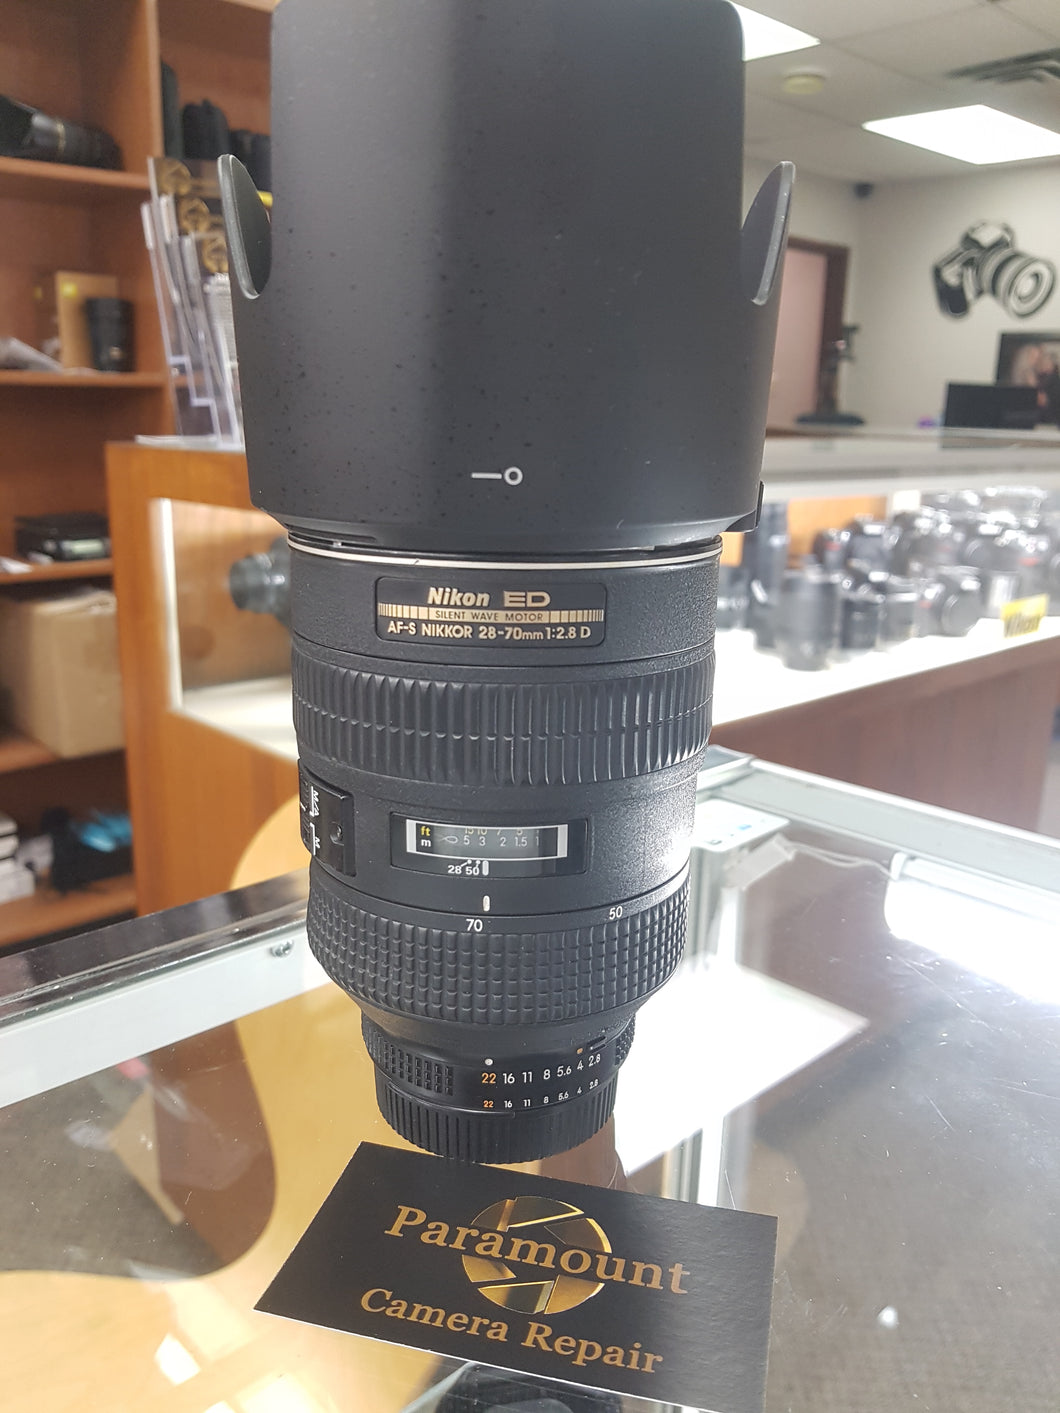 Nikon AF-S 28-70mm f/2.8D ED-IF Lens - Used Condition 8.5/10 - Paramount Camera & Repair